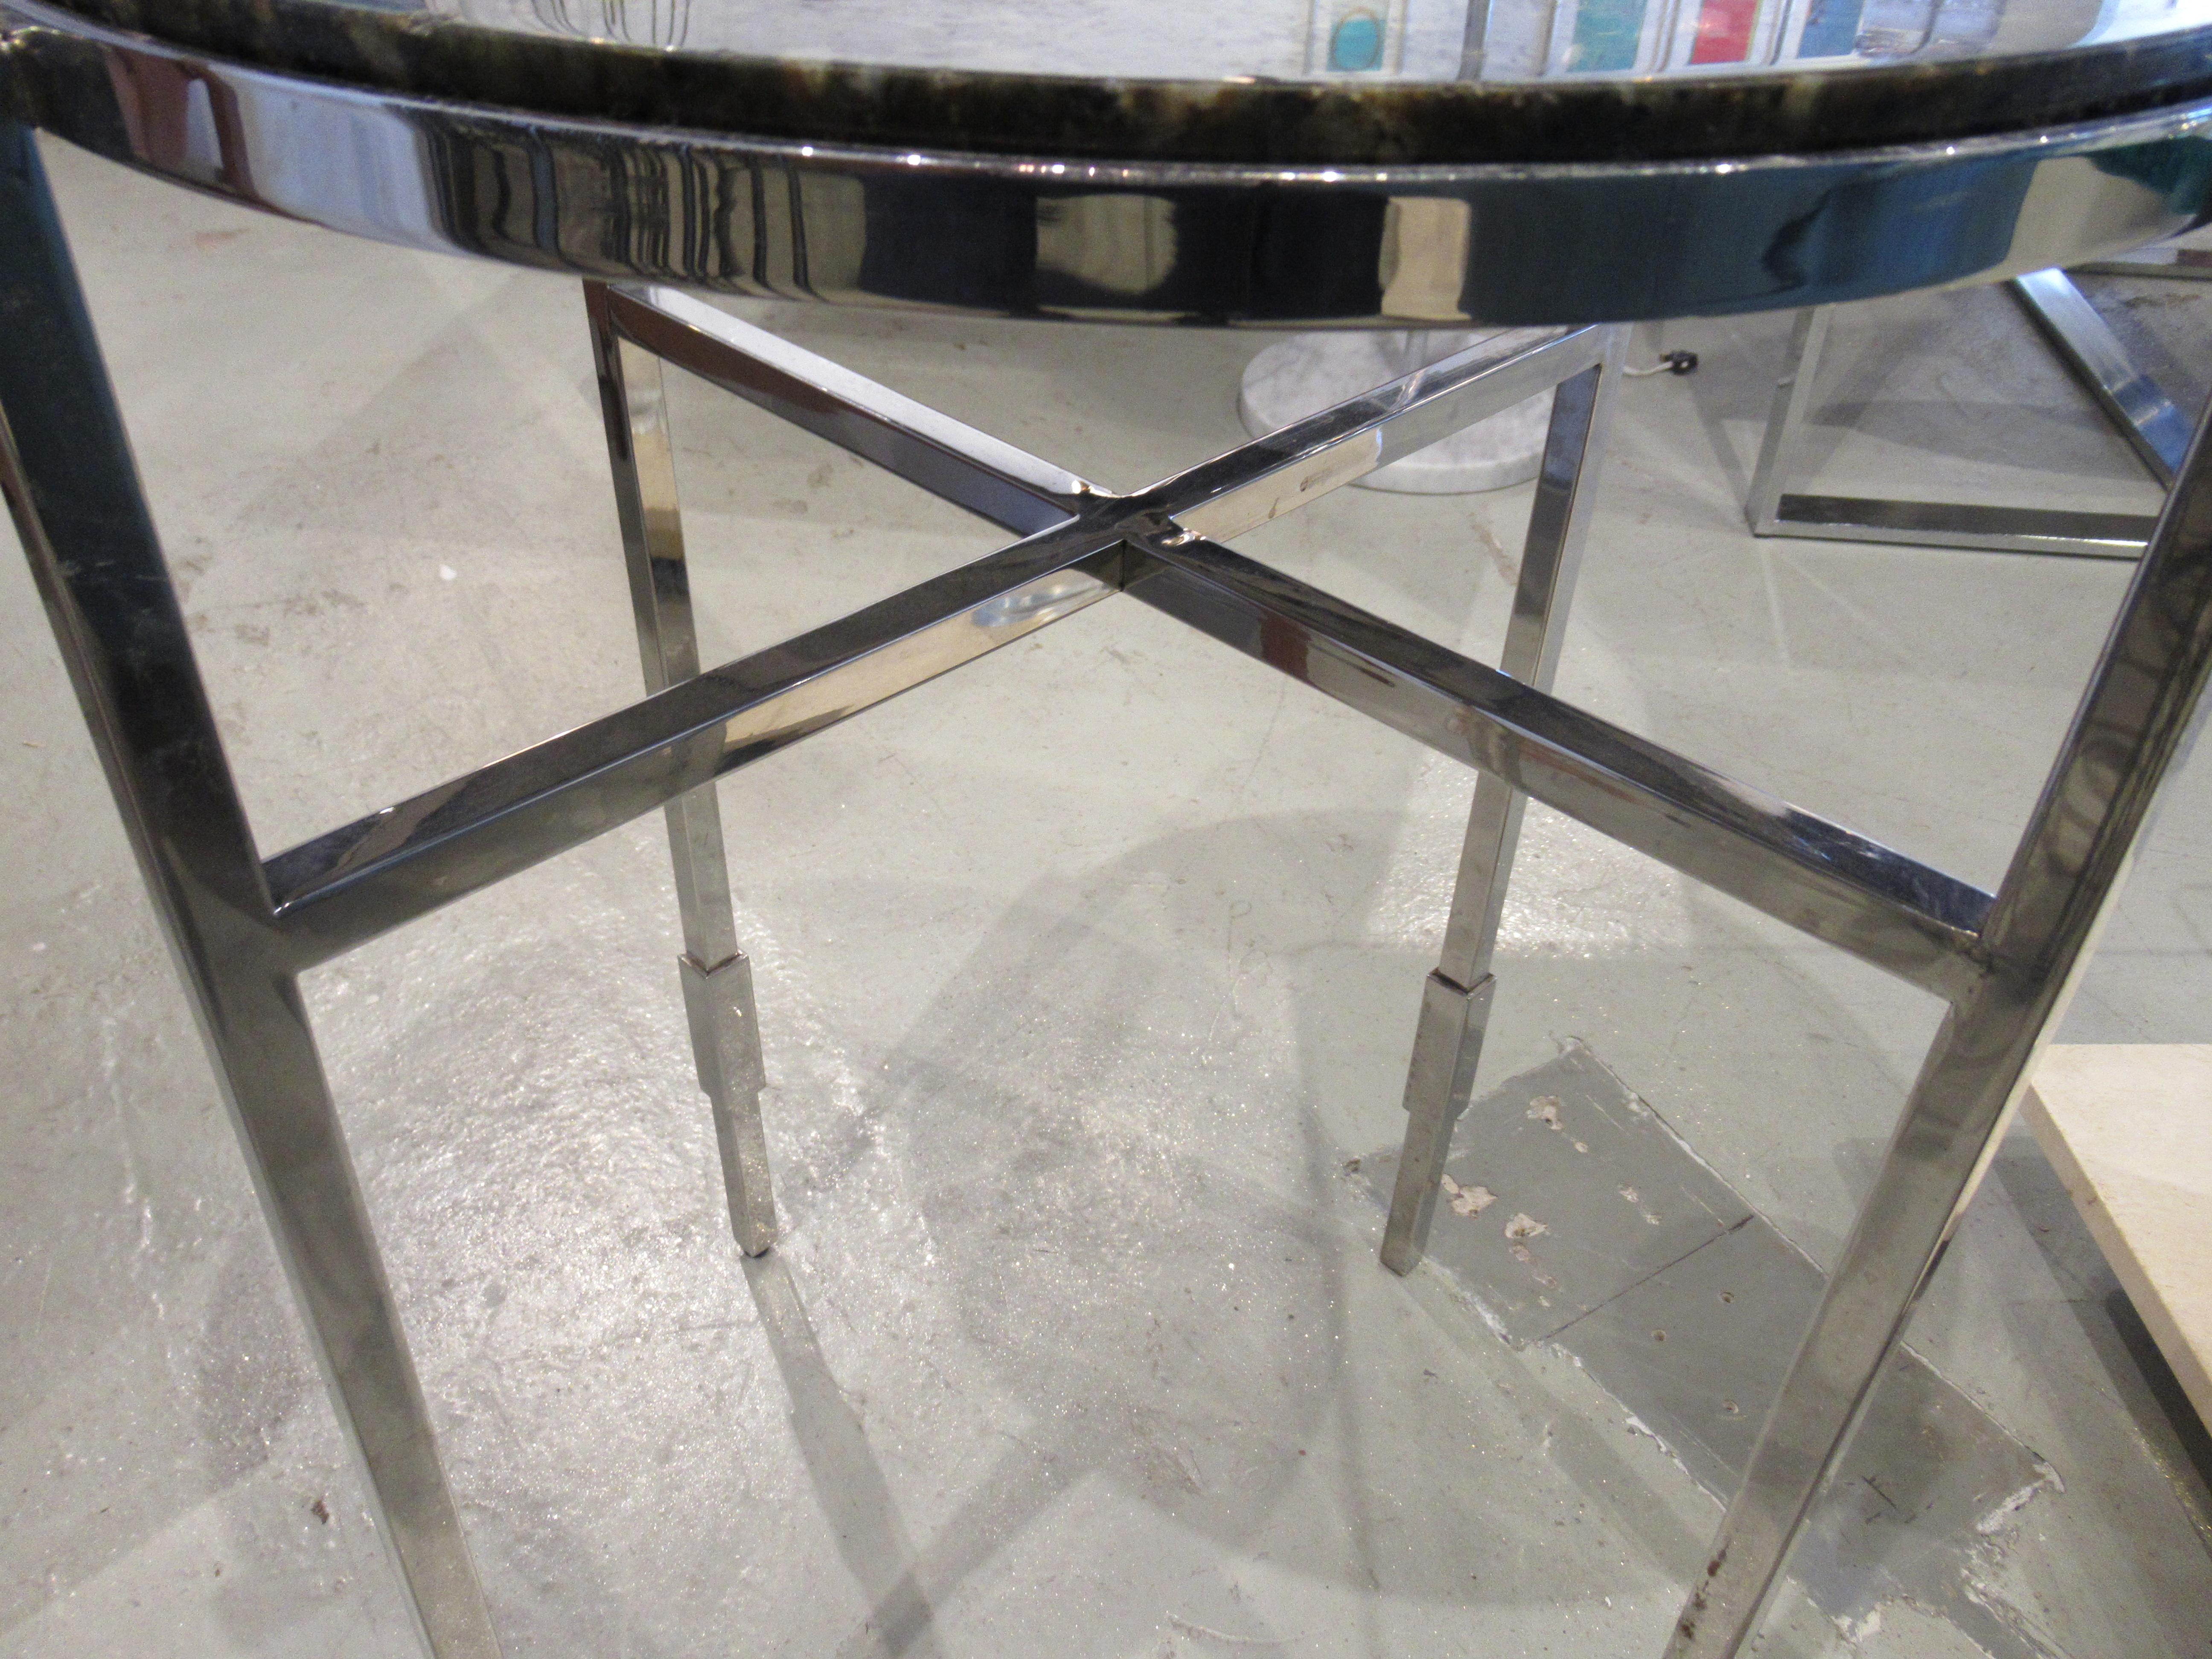 American Modern Polished Chrome & Granite Occasional Tables, Michael Graves In Excellent Condition For Sale In Hollywood, FL